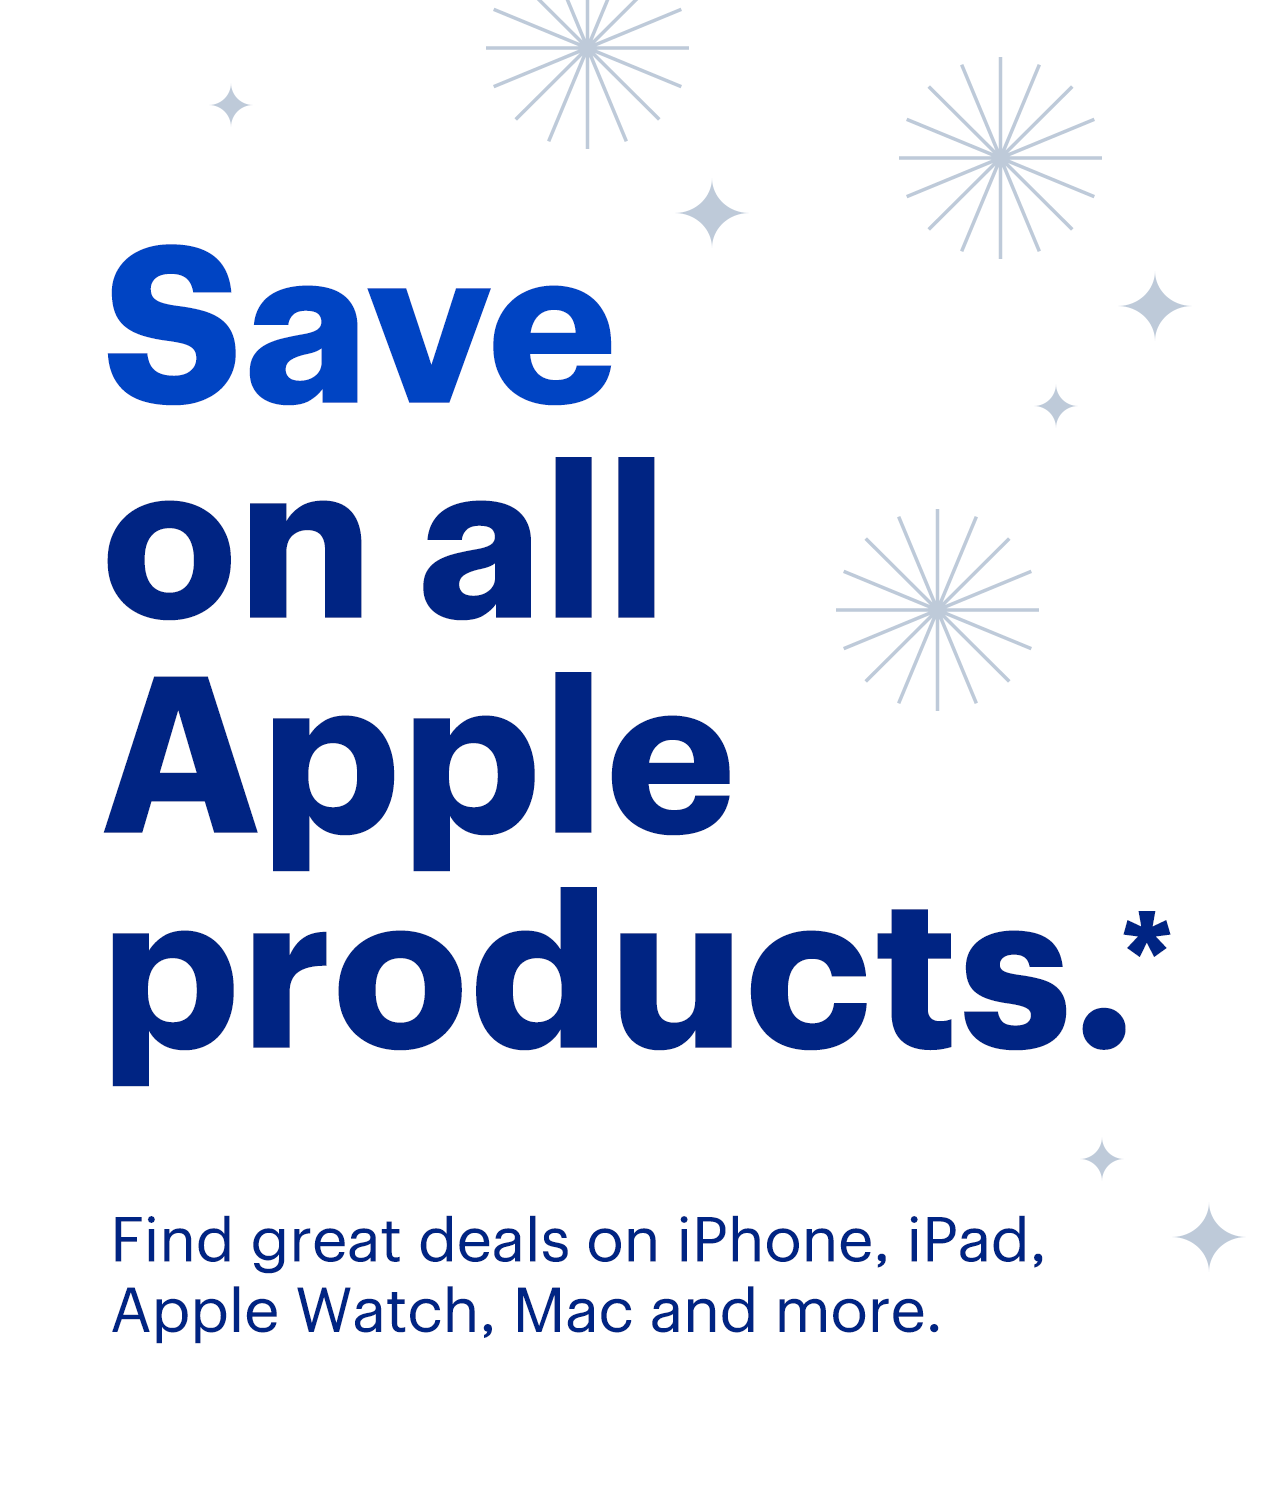 Save on all Apple products. Find great deals on iPhone, iPad, Apple Watch, Mac and more. Reference disclaimer.